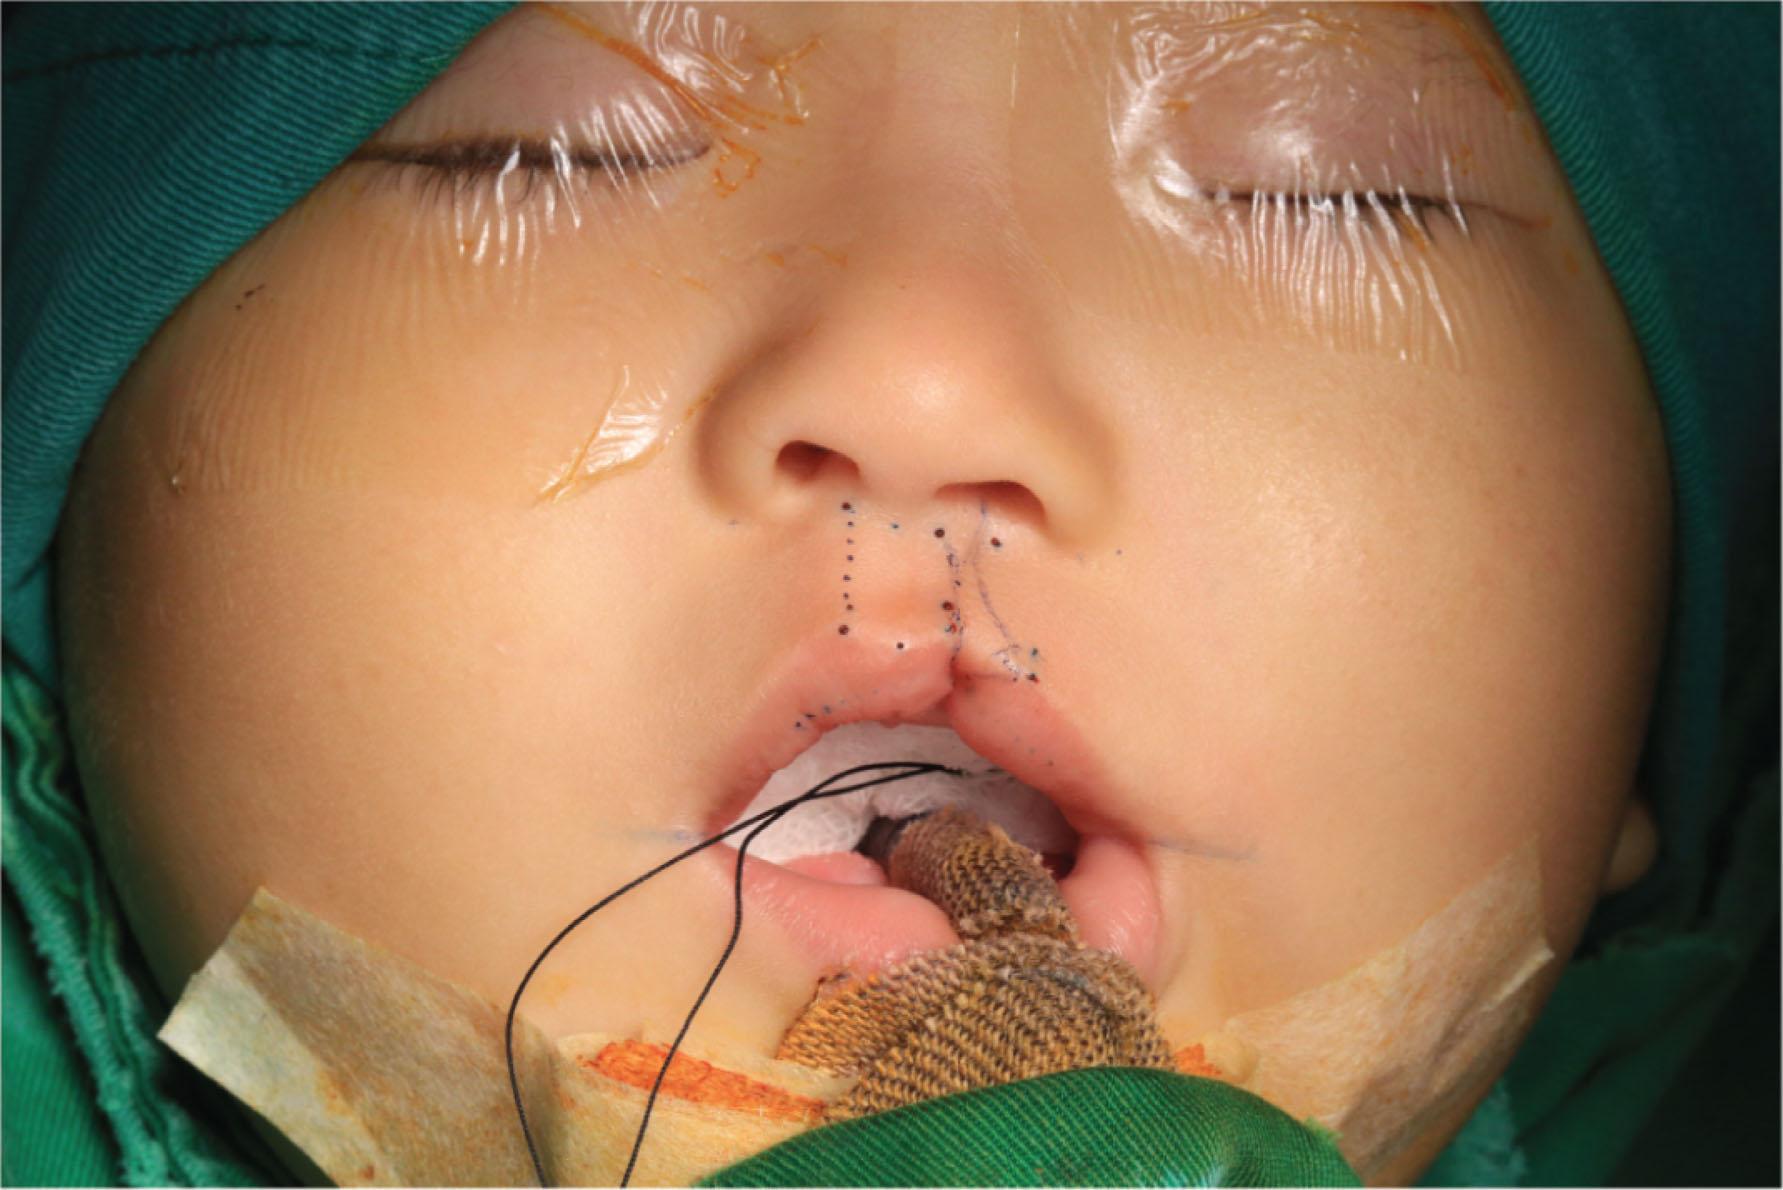 Figure 19.2.14, Marking for the simple rotation incision if the height discrepancy is less than 2 mm. A WSR flap is still designed for restoring of the lip contour line.